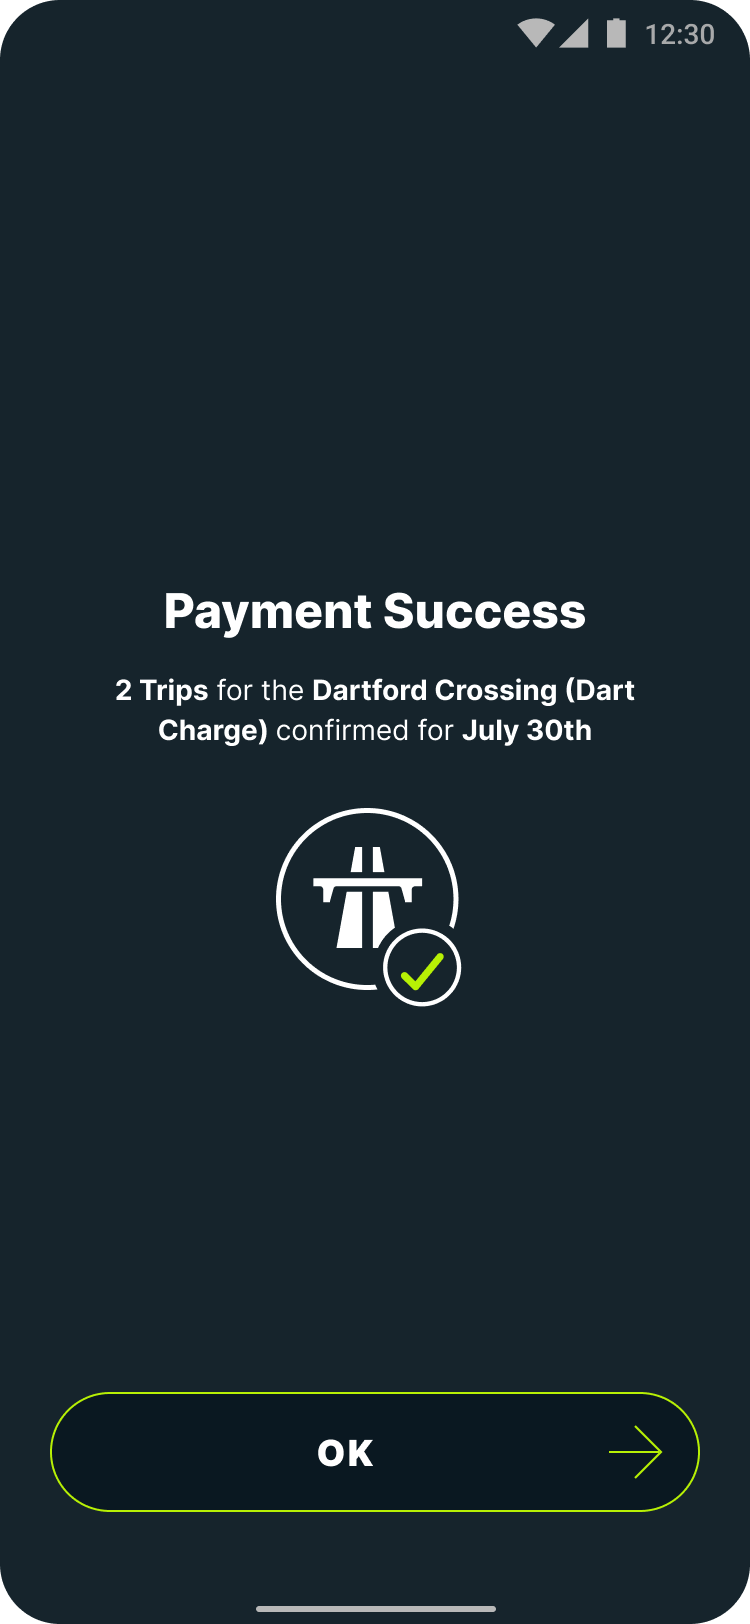 Dart Charge payment confirmation screen on Caura